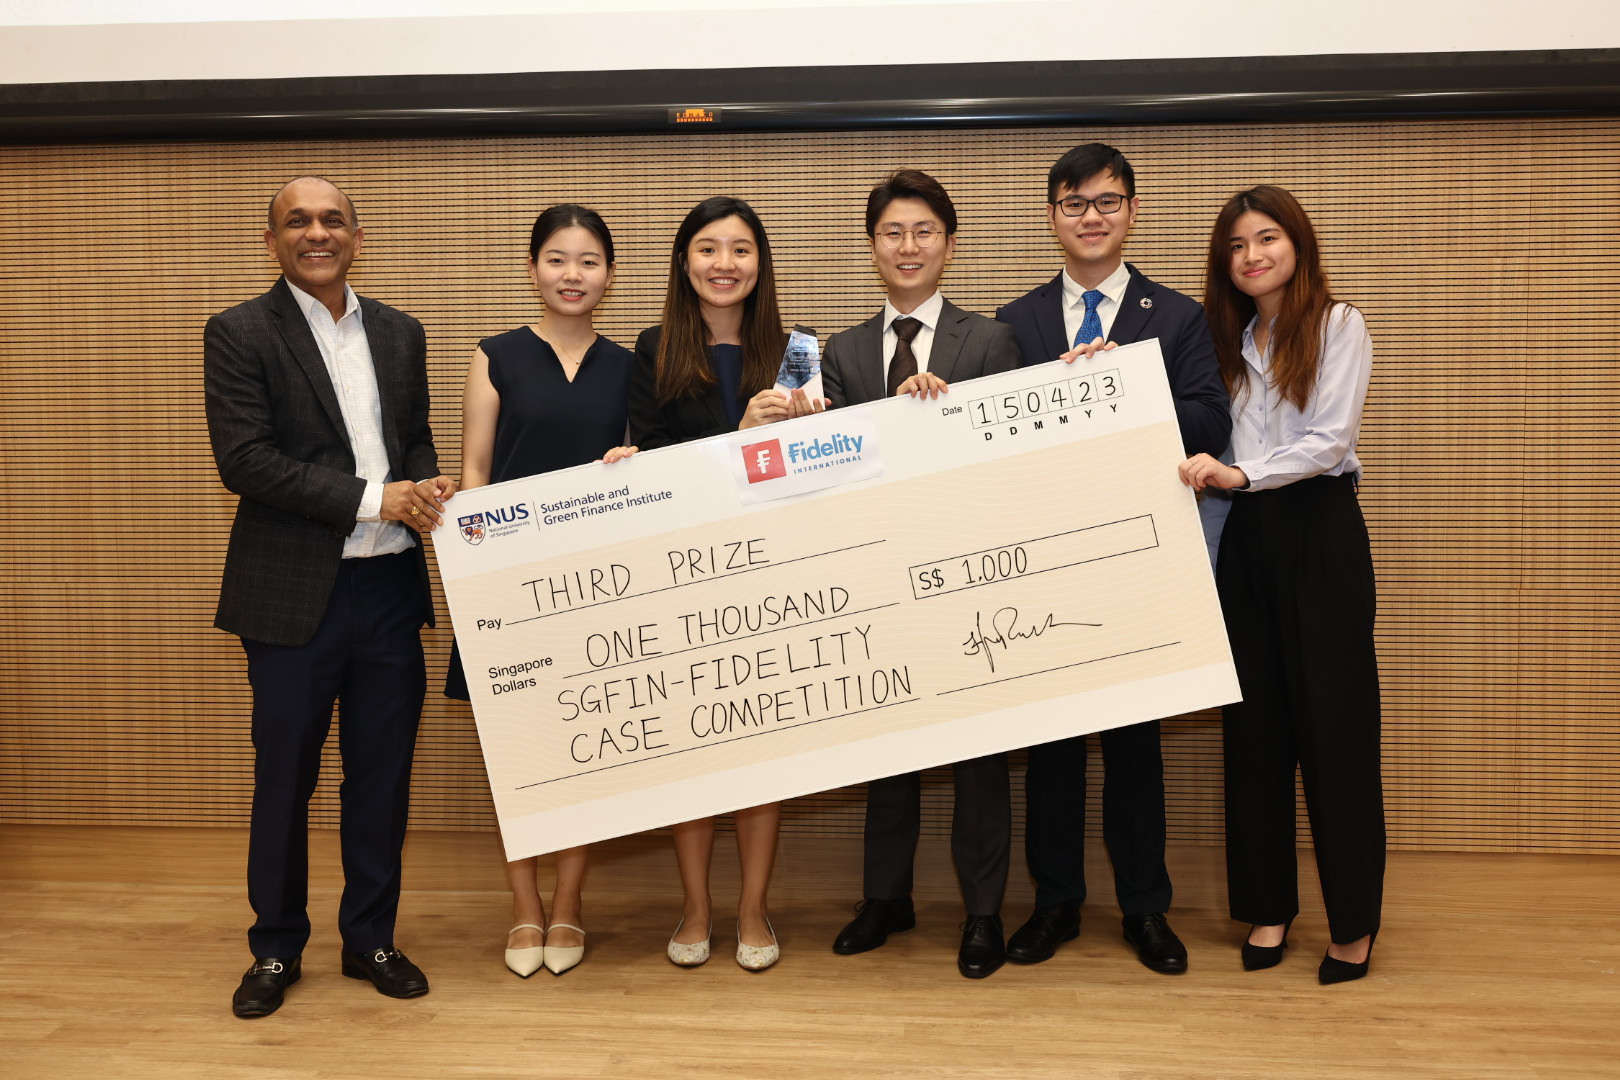 Team JCube, consisting of NUS MSc in Sustainable and Green Finance students, won the third prize. (2nd to 5th position from left) He Xi, Zhao Jianxin, Liu Jiahuan, and Jefferson. They proposed the idea of building an ecosystem that allows for economies of scale to be reaped by a coordinated SME sector. This means that aspects such as financing, installing, measuring, monitoring and reporting could be achieved with lower costs.